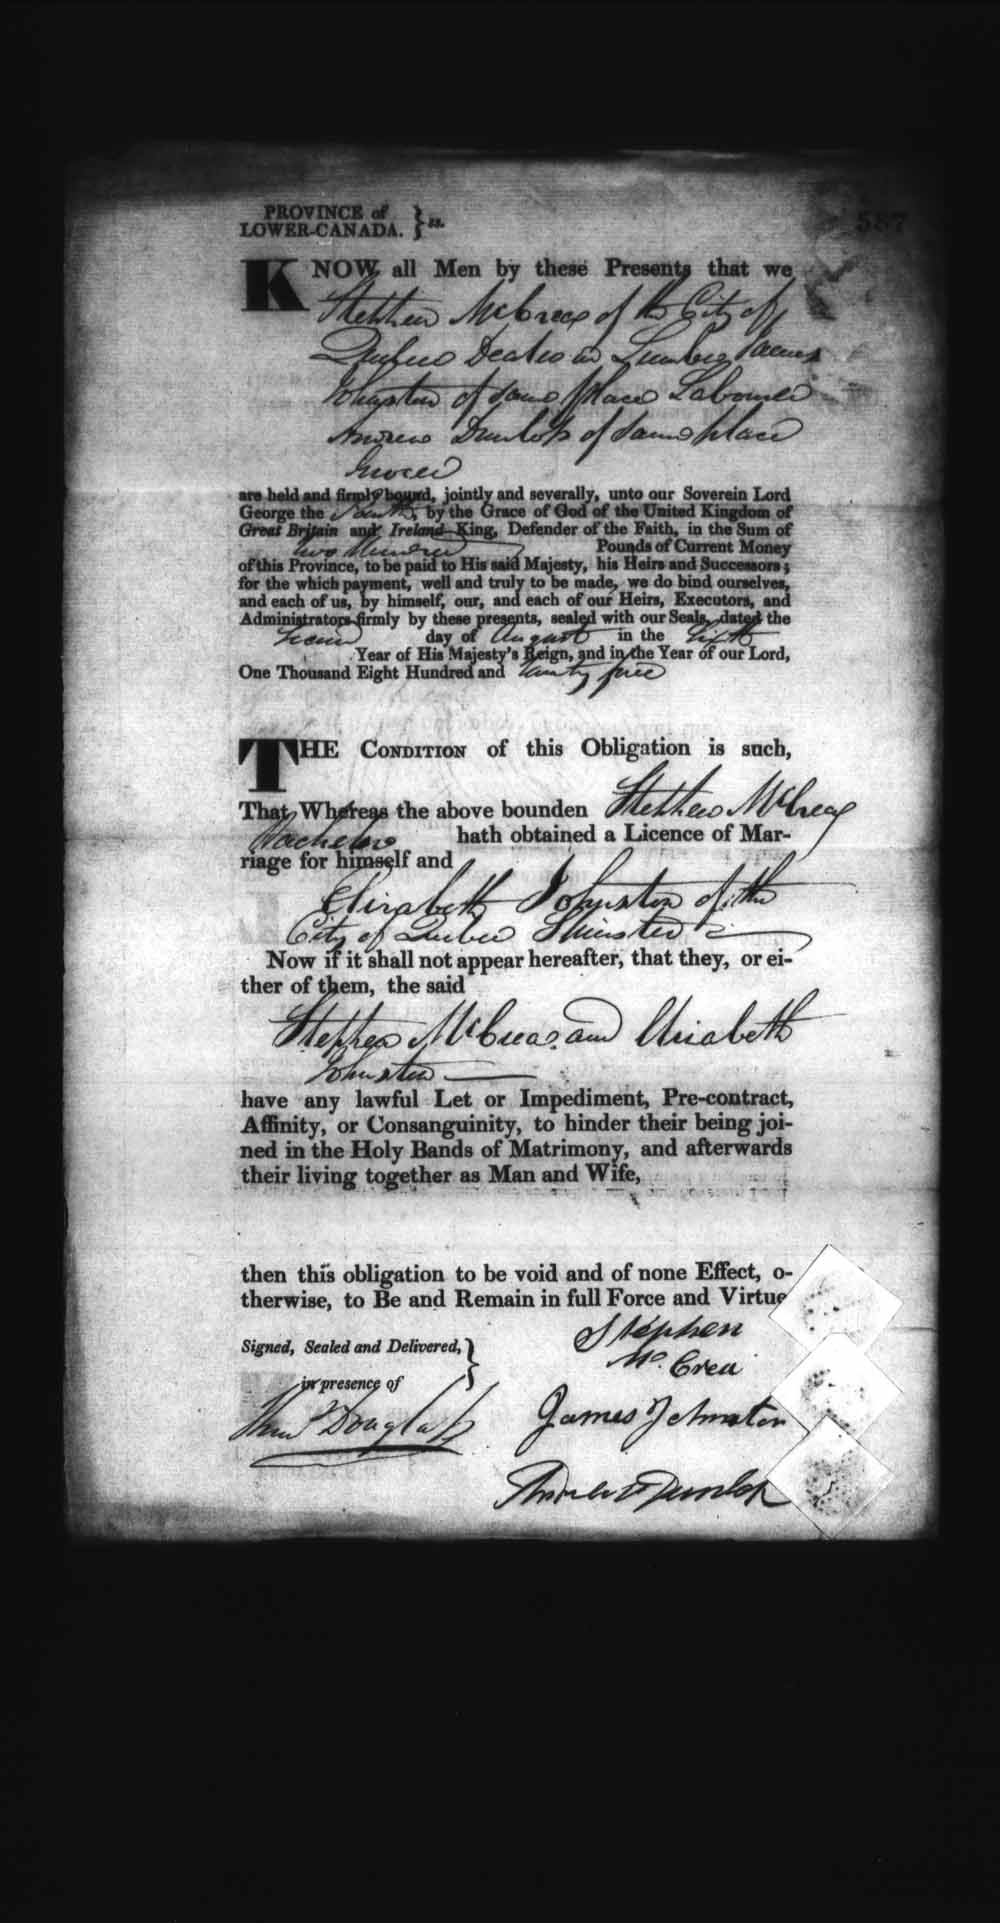 Digitized page of Upper and Lower Canada Marriage Bonds (1779-1865) for Image No.: e008236593